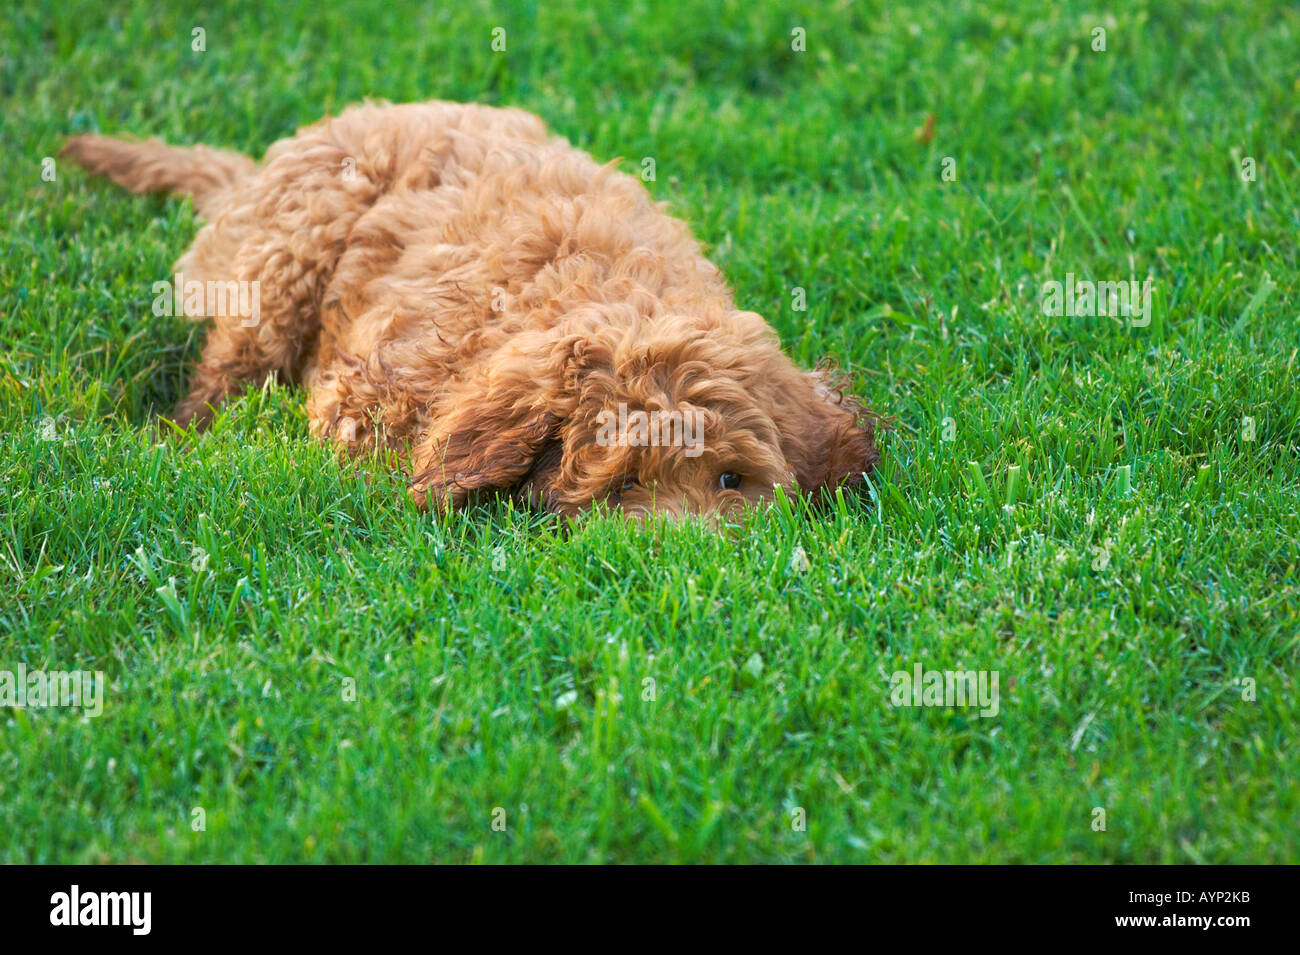 golden doodle dogs puppy dog fluffy curly hair playing green grass new breed Stock Photo